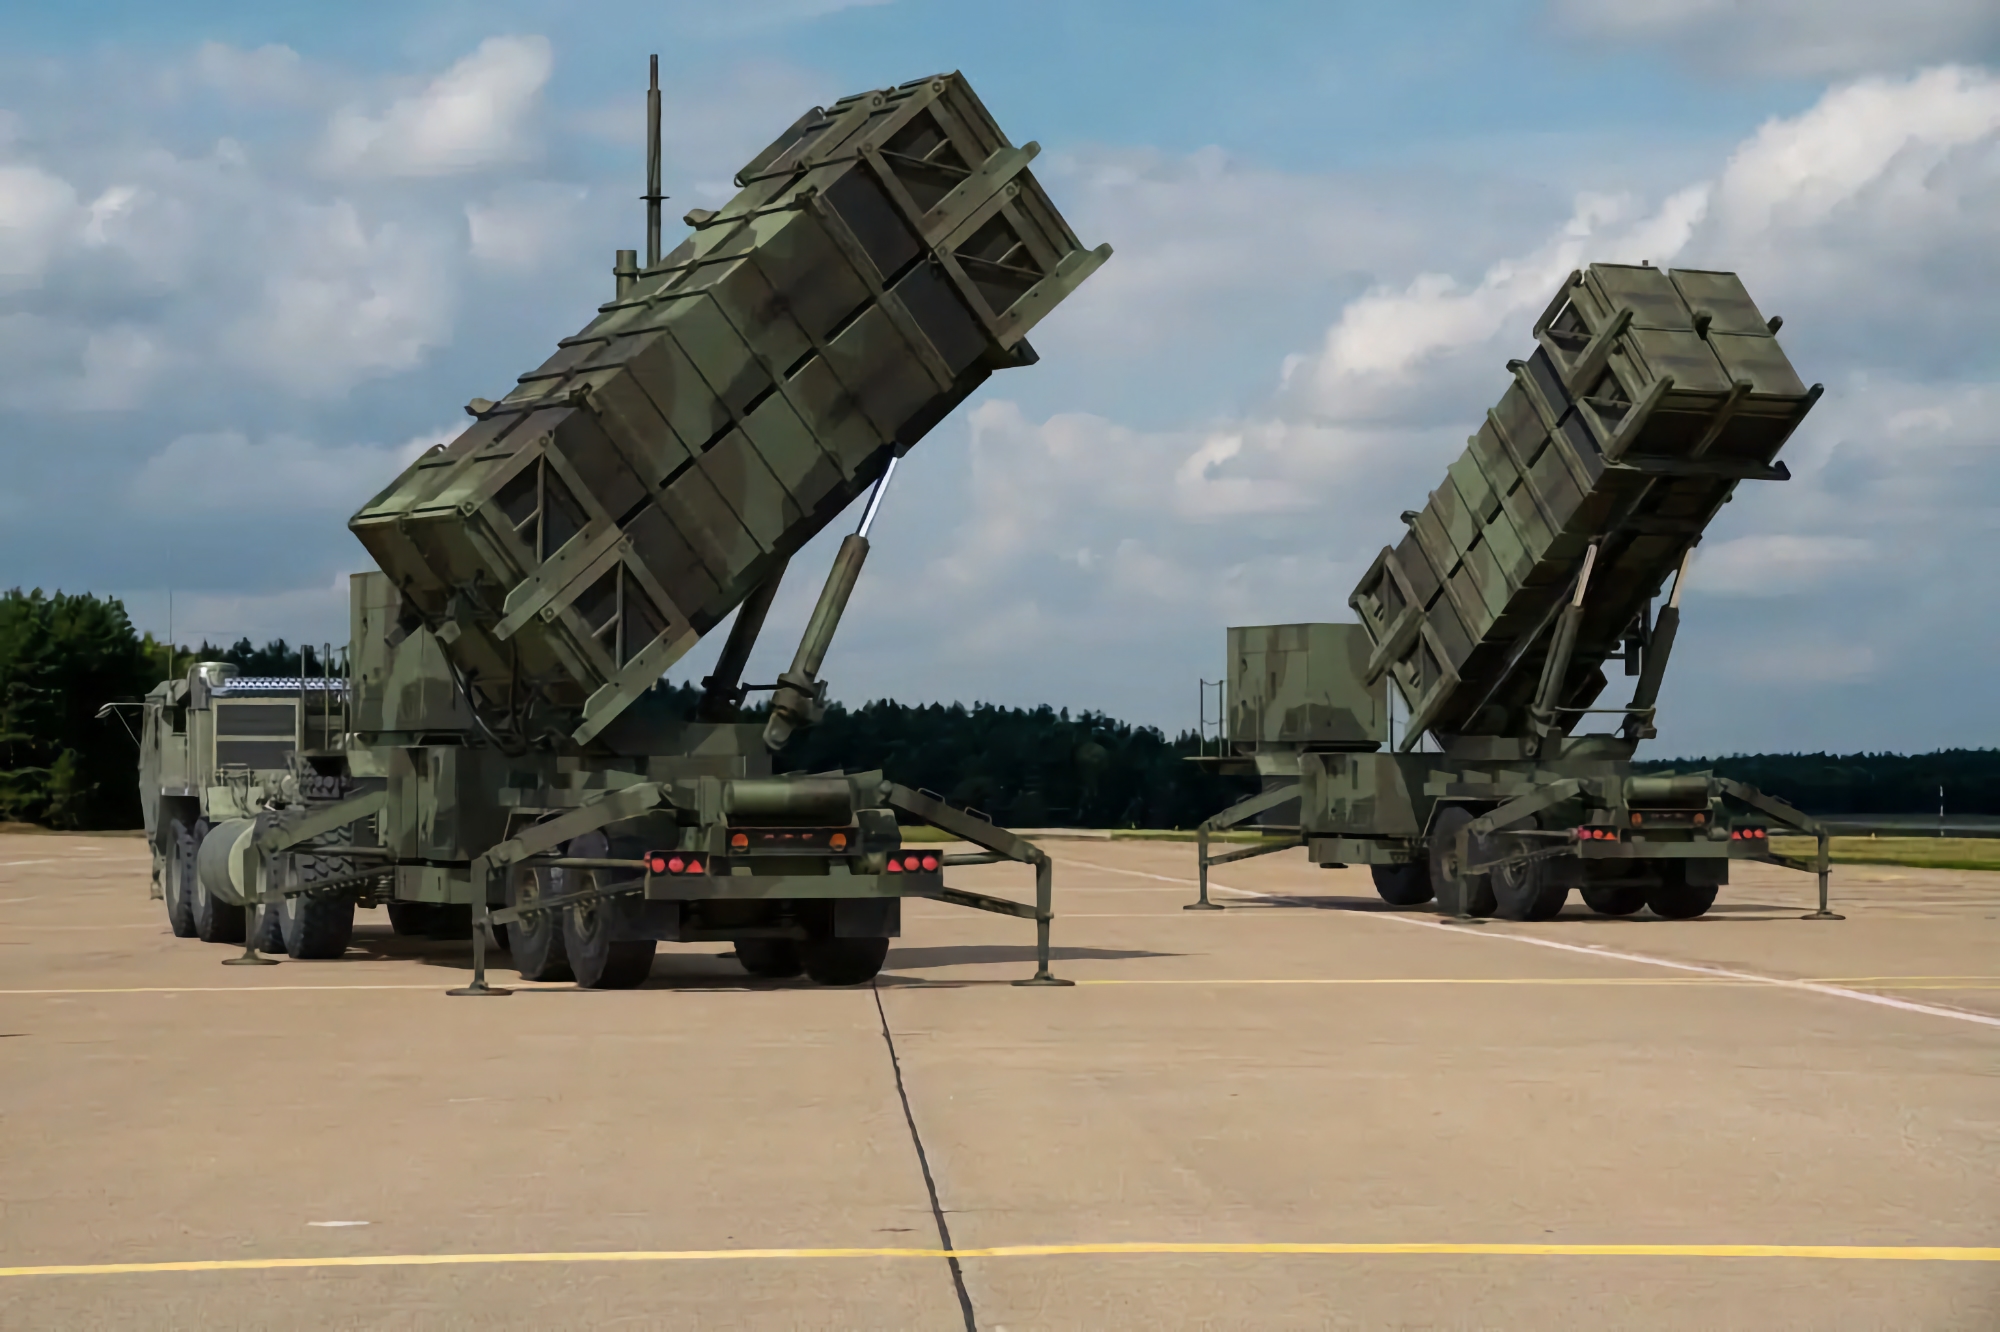 Official: US and Netherlands to give Ukraine additional Patriot surface-to-air missile systems that can shoot down ballistic targets